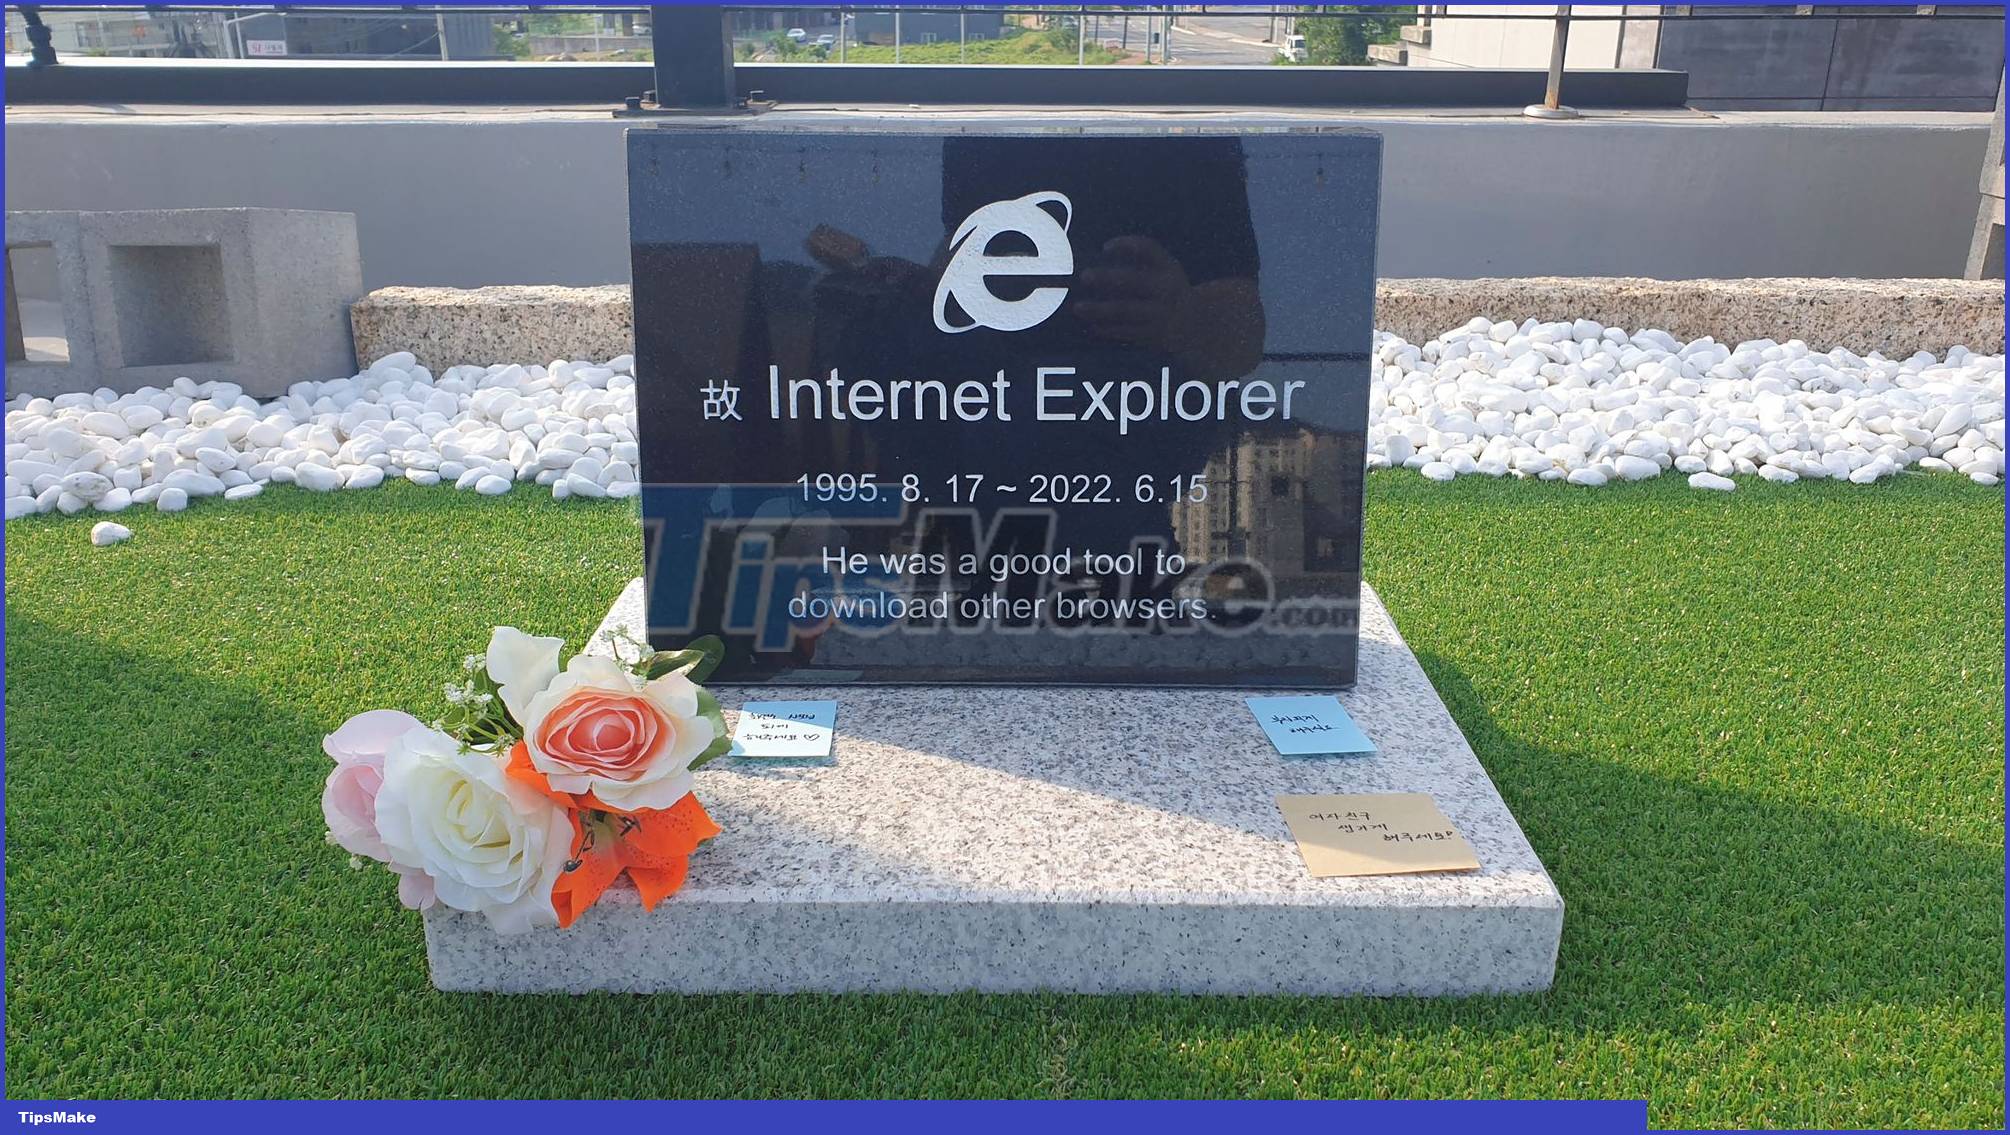 looking-back-at-the-life-full-of-ups-and-downs-of-internet-explorer-picture-1-PjKIhZ5B1.jpg